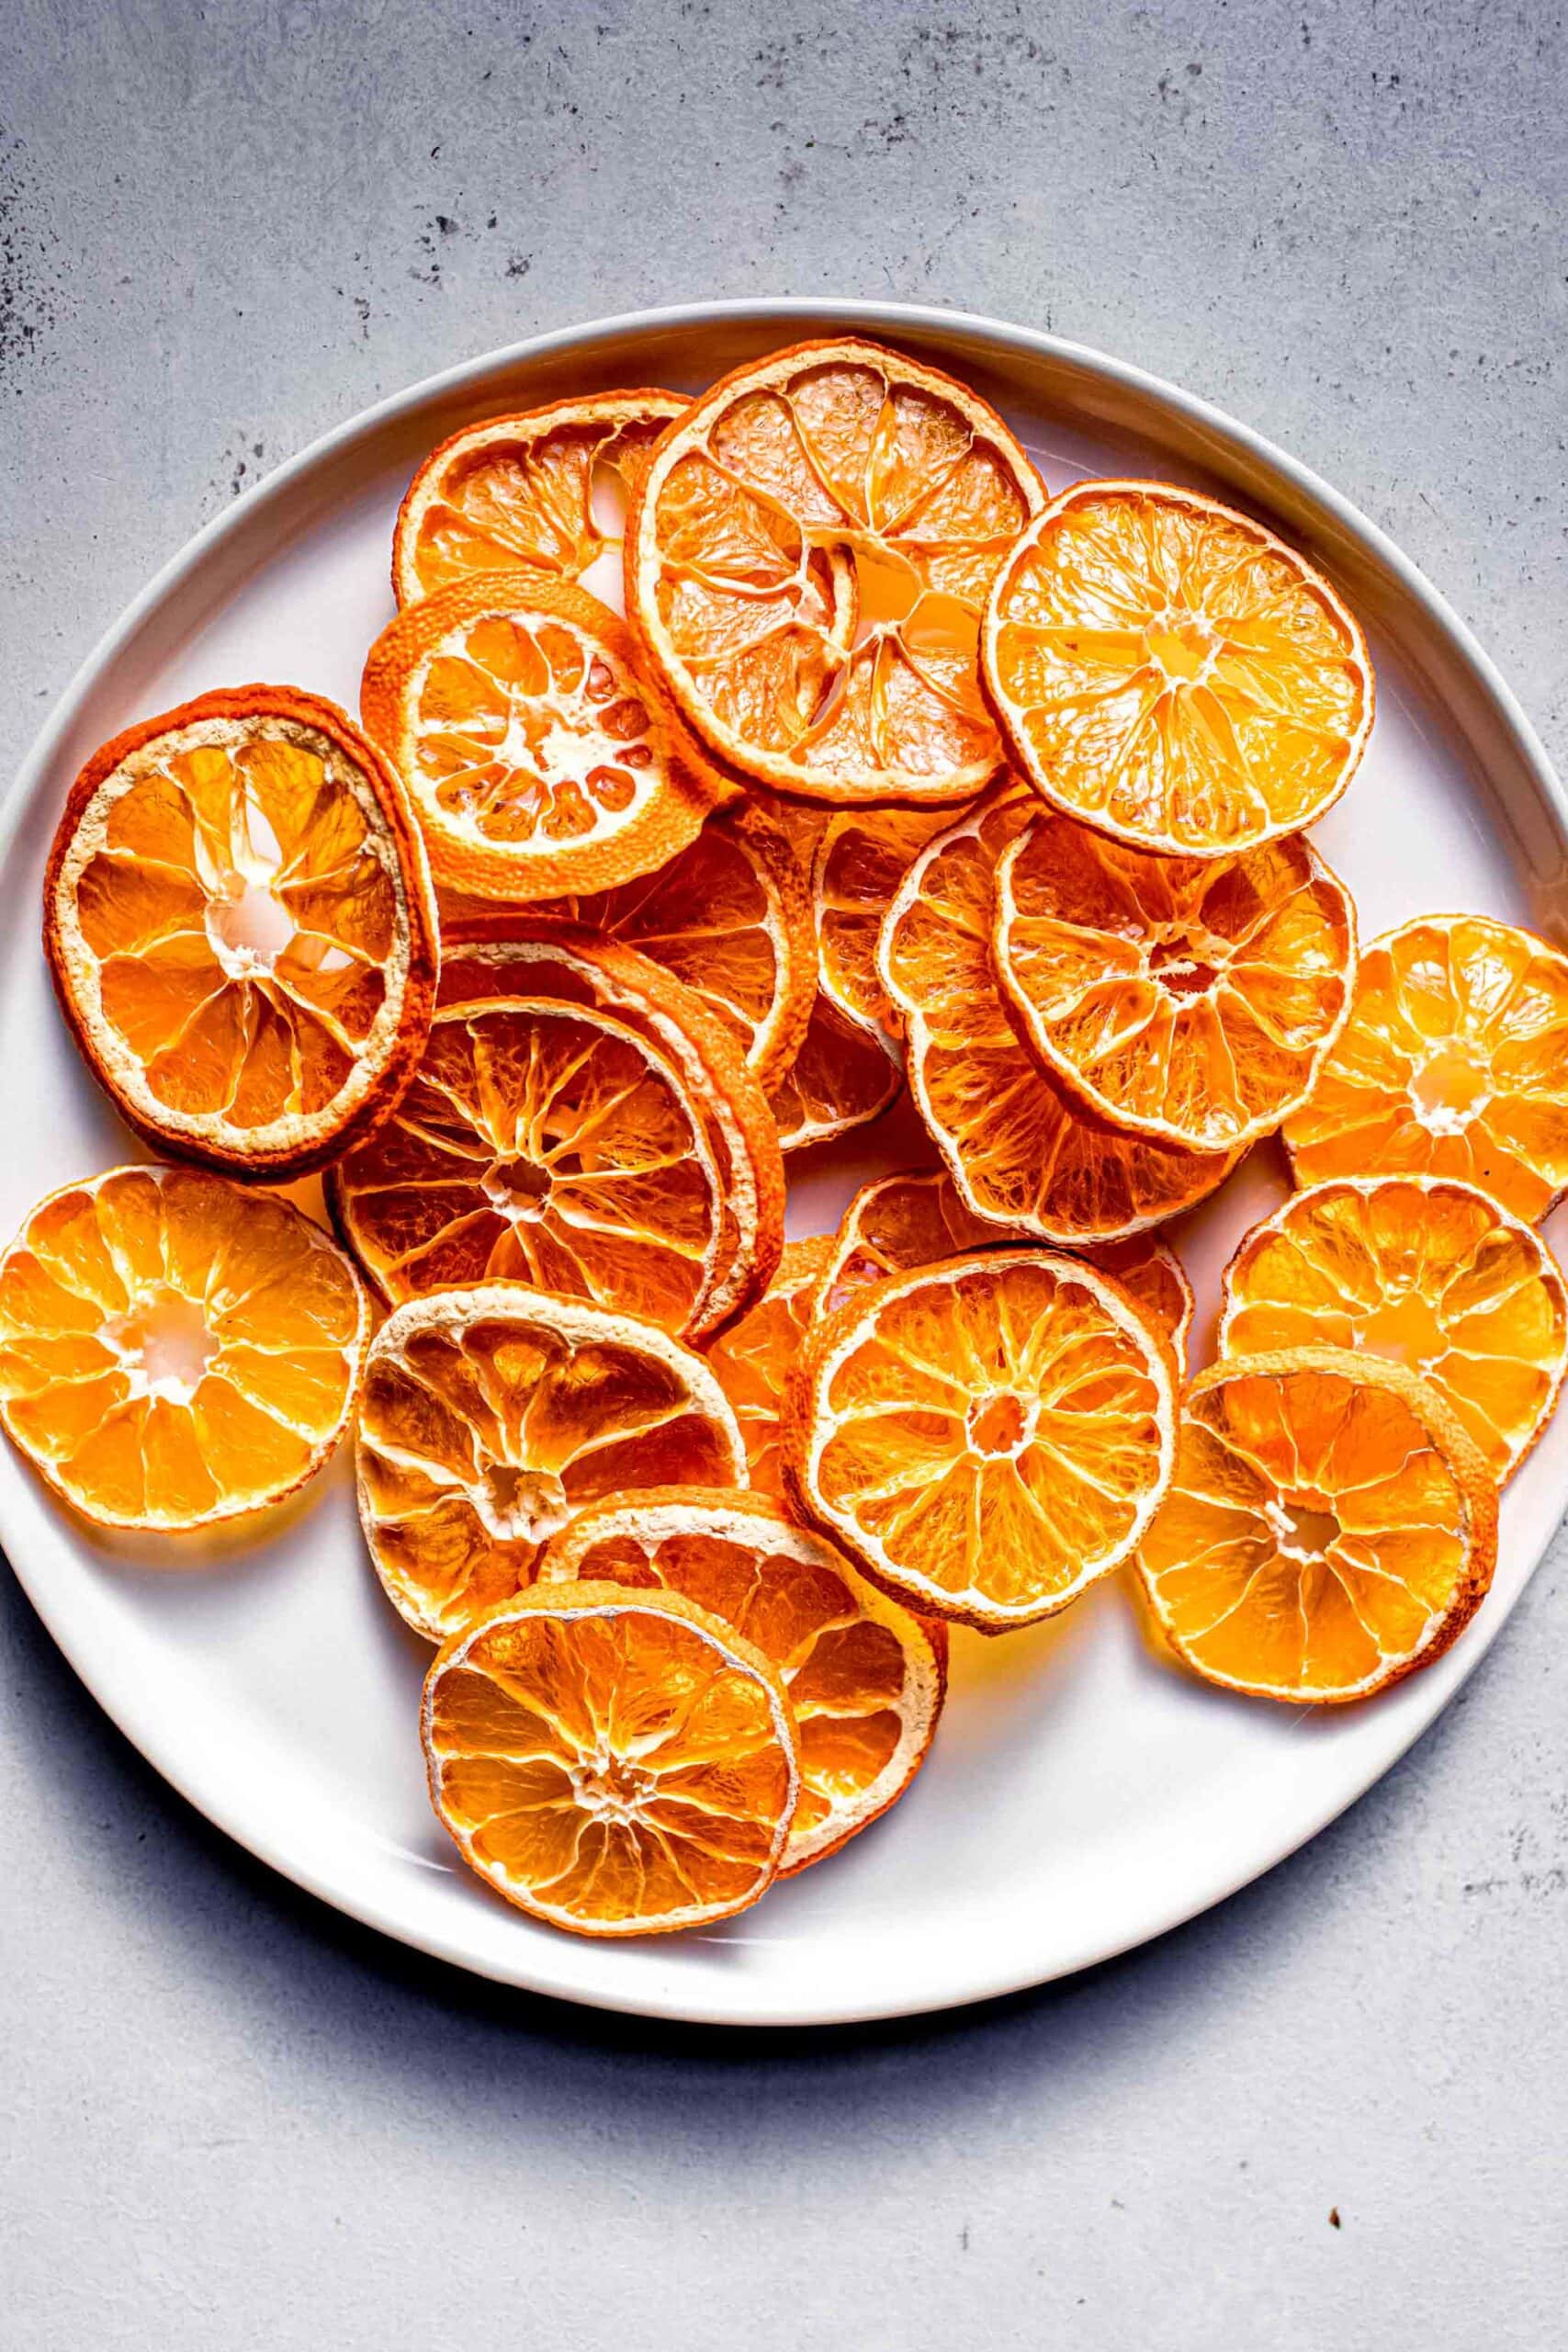 Dried orange slices on small white plate.